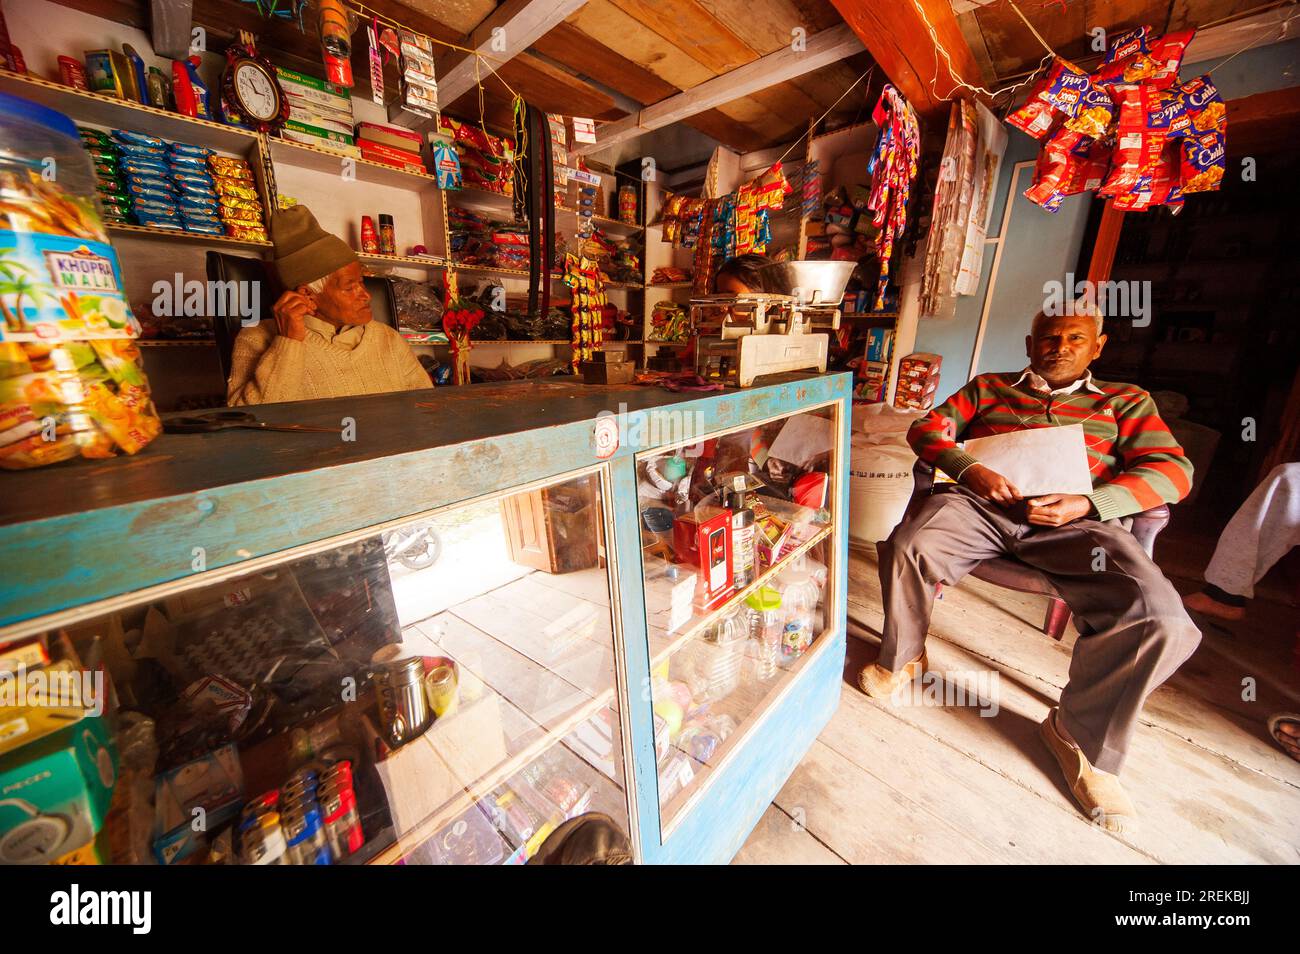 Indian people on a small grocery shop at Salakwar, Nandhour Valley, Uttarakhand, India Stock Photo